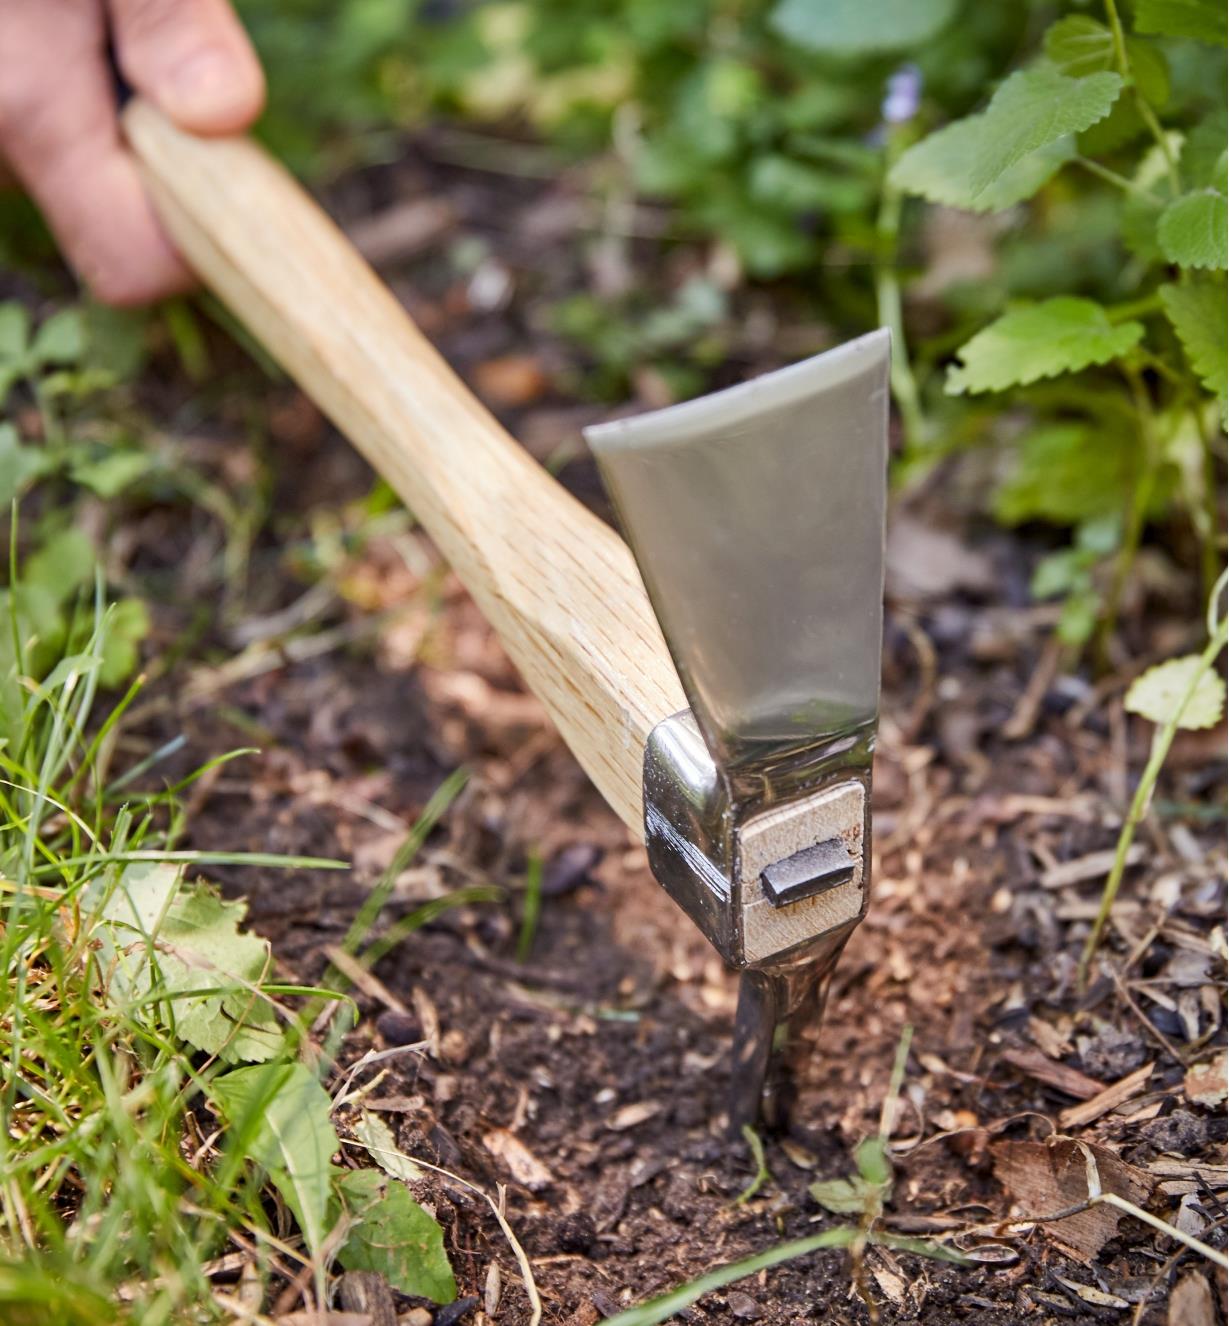 Breaking up soil with a pick mattock